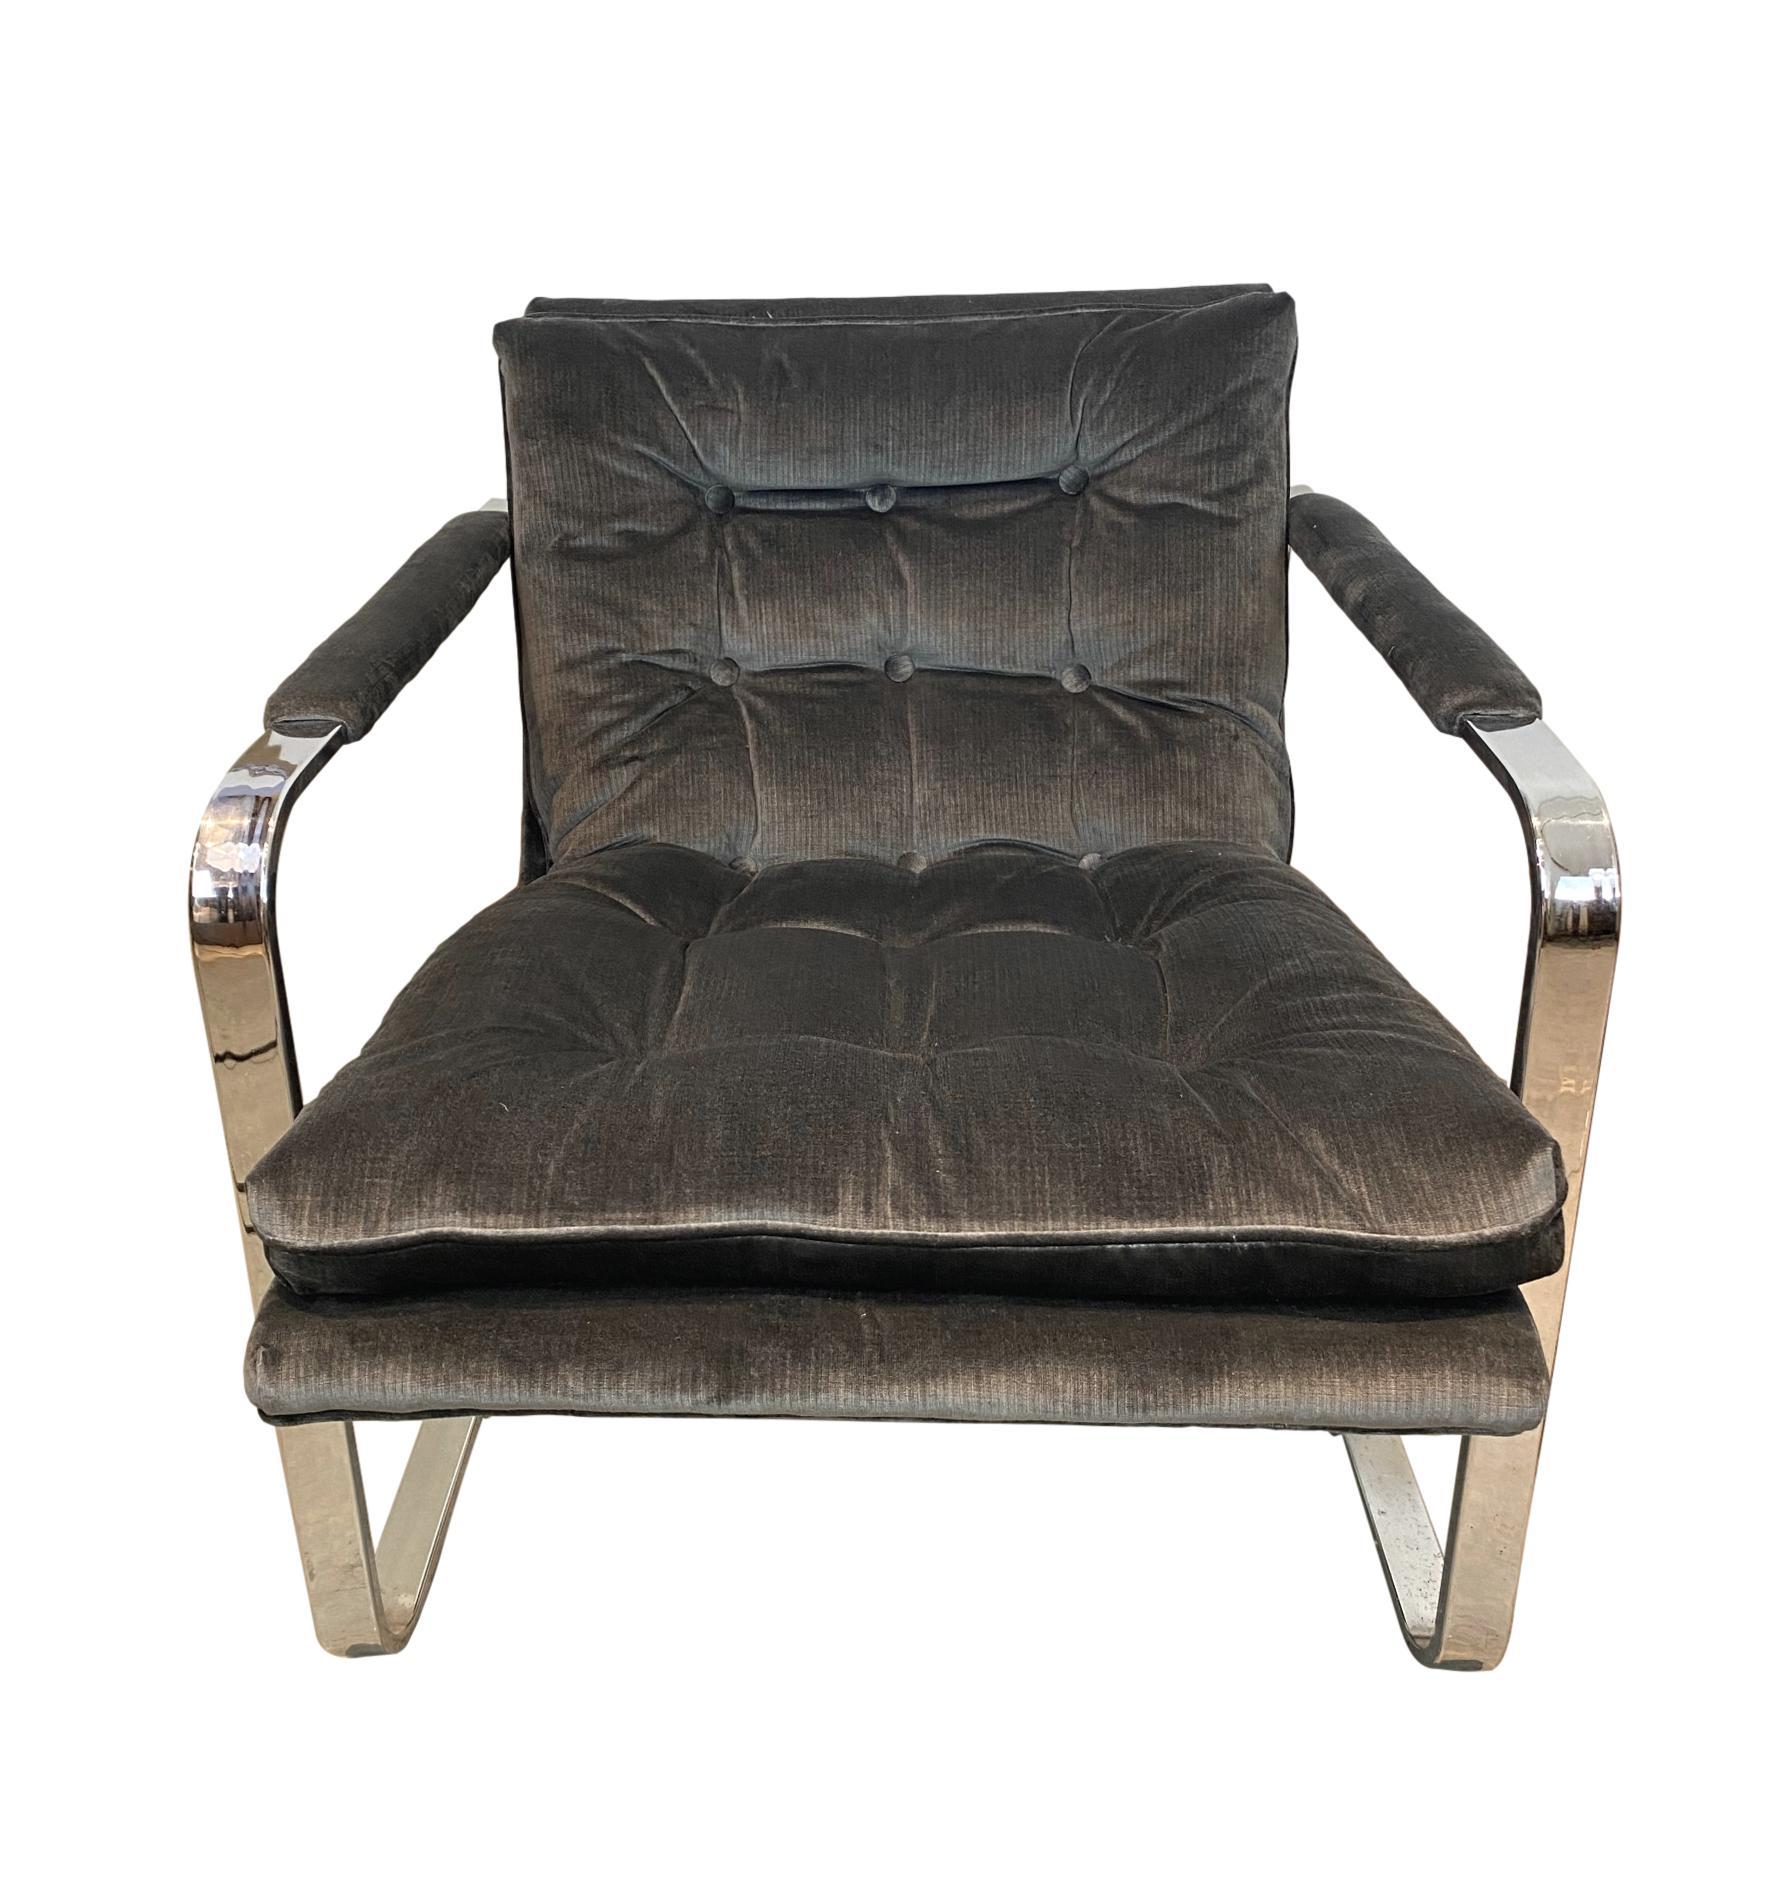 Forged Pair of Midcentury Chrome Lounge Chairs, circa 1970, New Scalamandré Upholstery